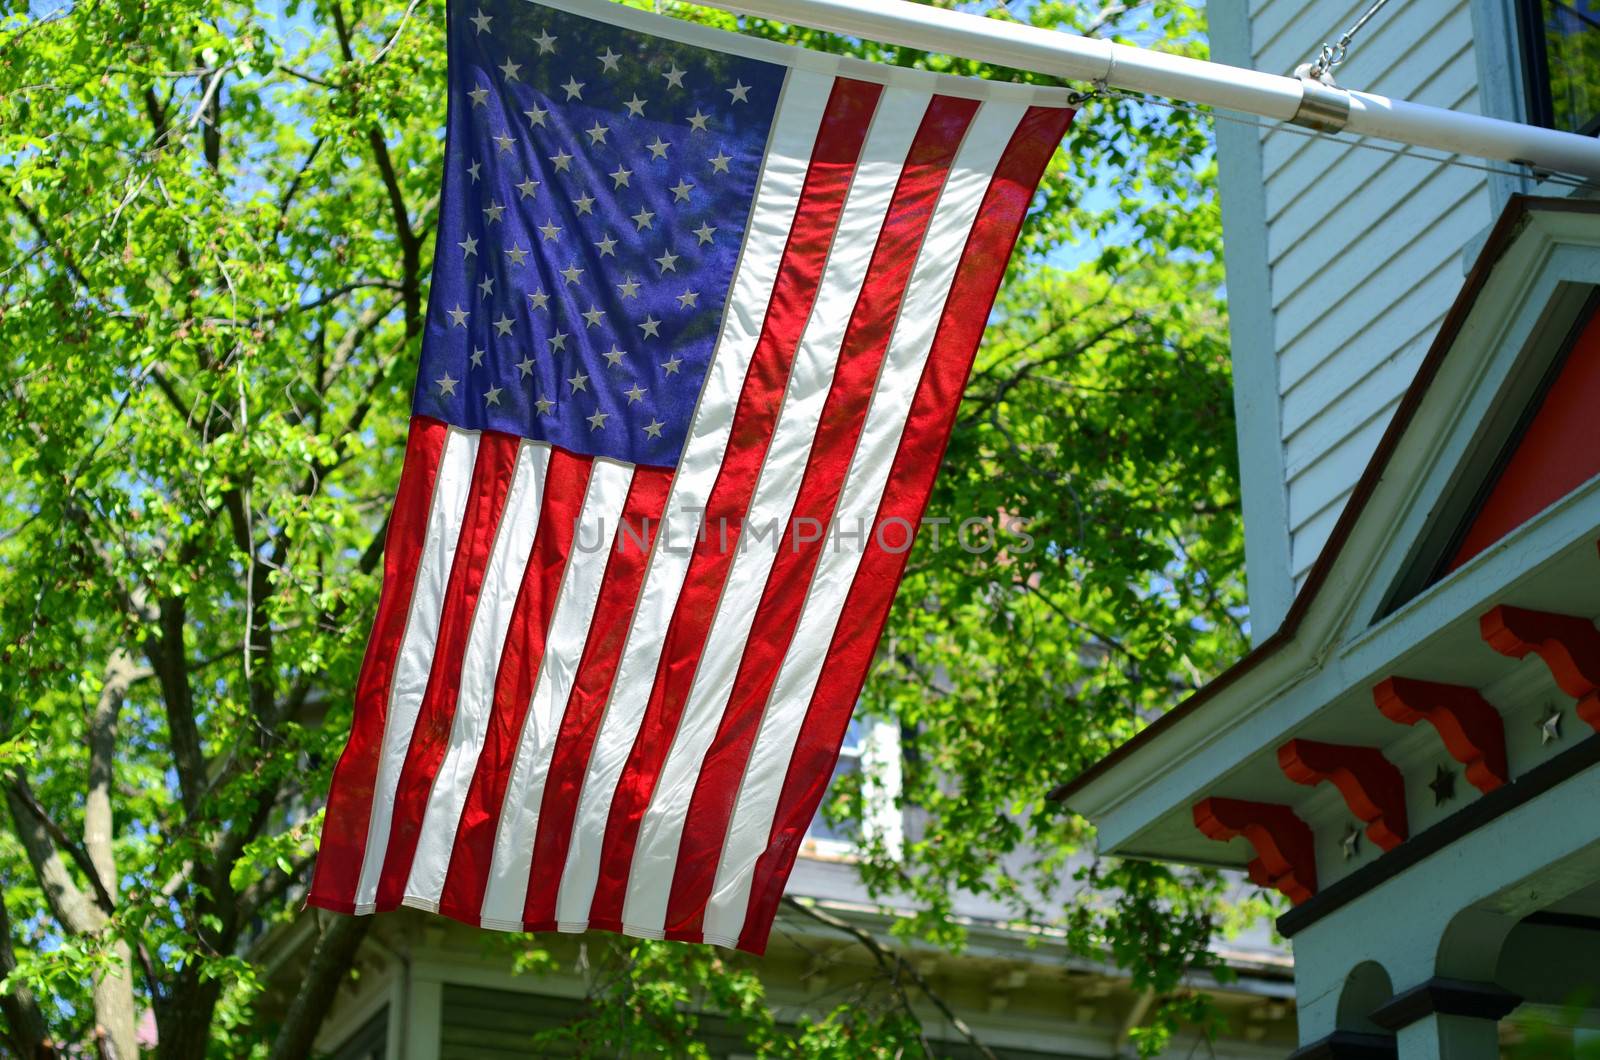 American Flag Outside A House In Small Town USA